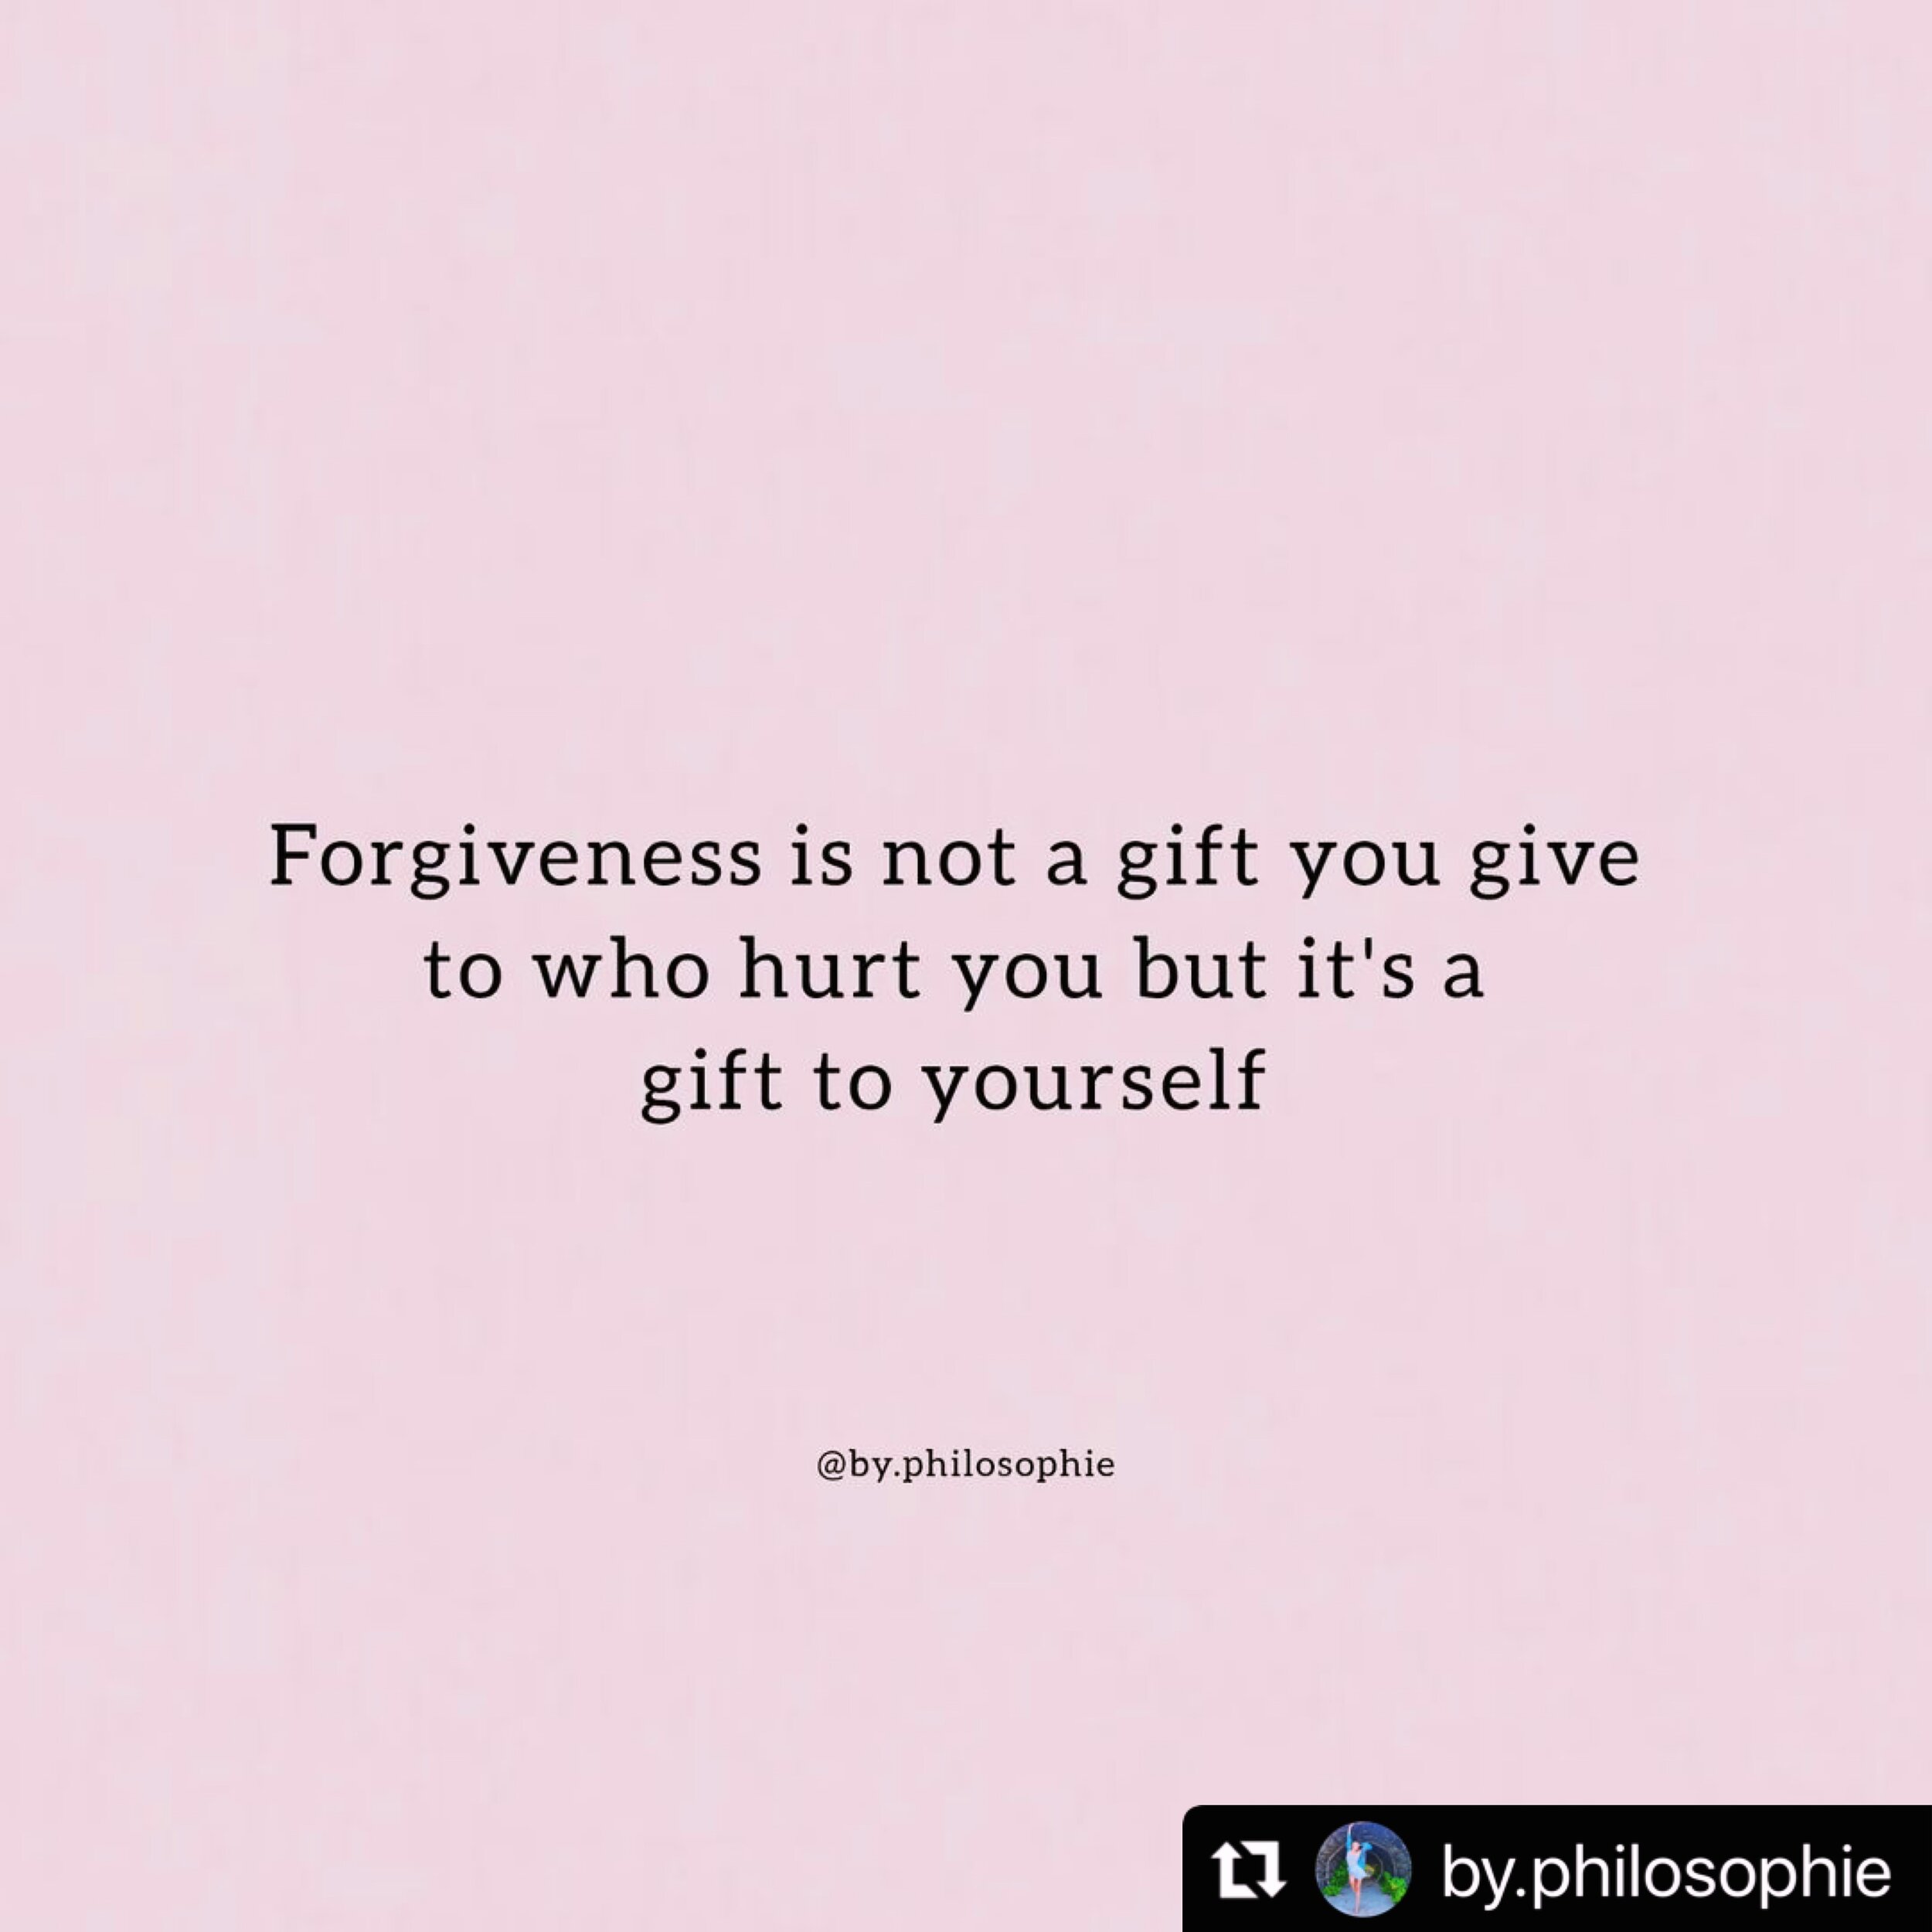 The best advice a therapist gave me on forgiveness was knowing when it&rsquo;s time to let go. Letting go, like forgiveness, doesn&rsquo;t mean the person isn&rsquo;t in your life anymore. It means you let go of the attachment you have to them, your 